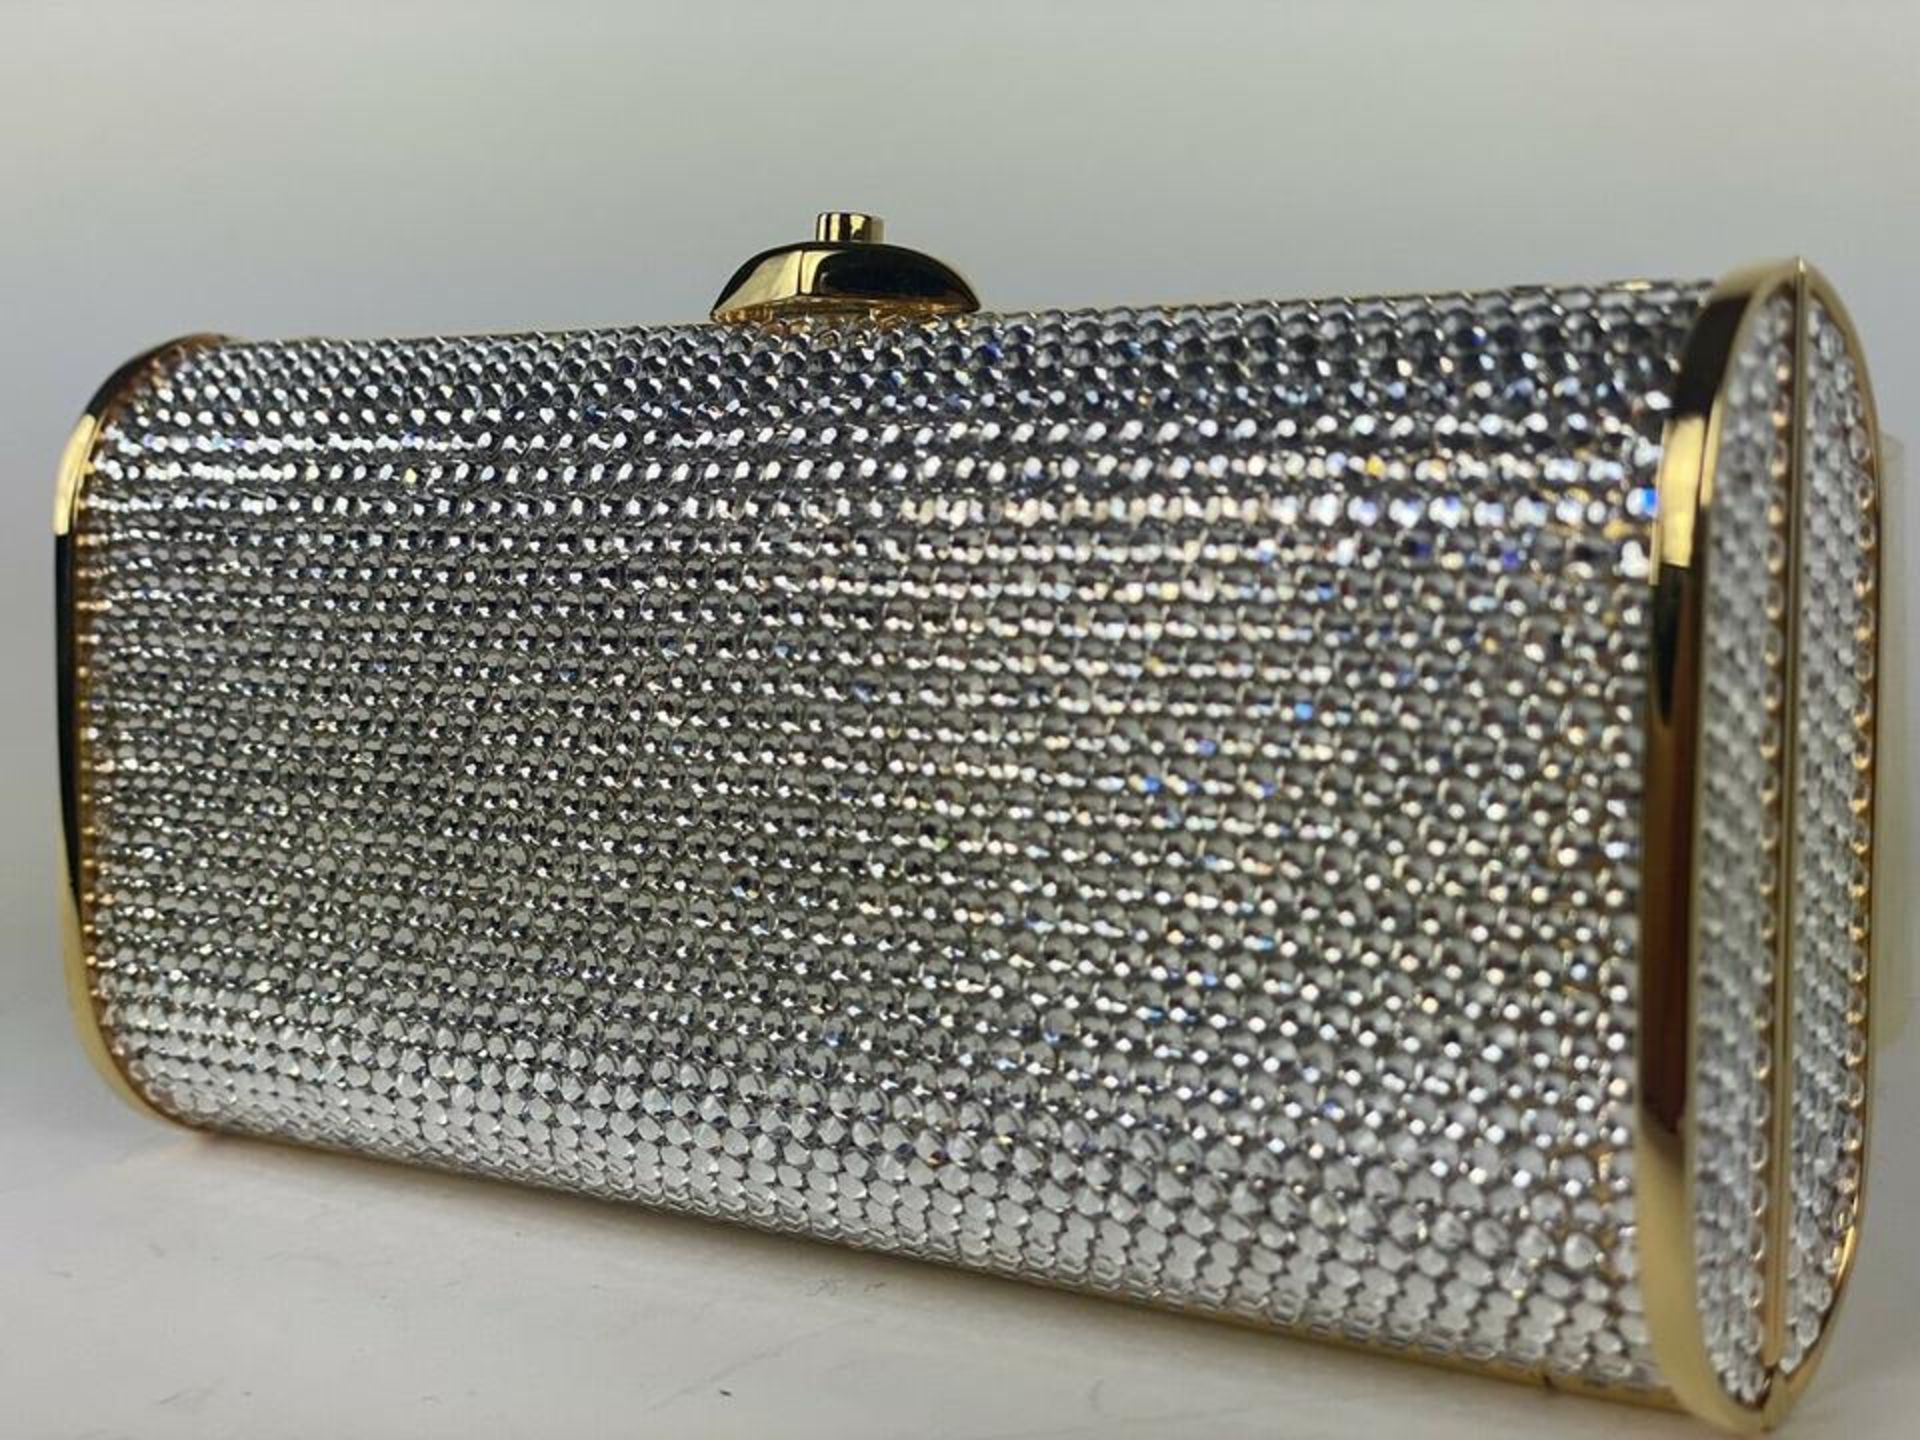 JUDITH LEIBER FULL BEAD CRYSTAL MINAUDIERE GOLD SILVER CHAIN CROSSBODY EVENING - Image 6 of 9